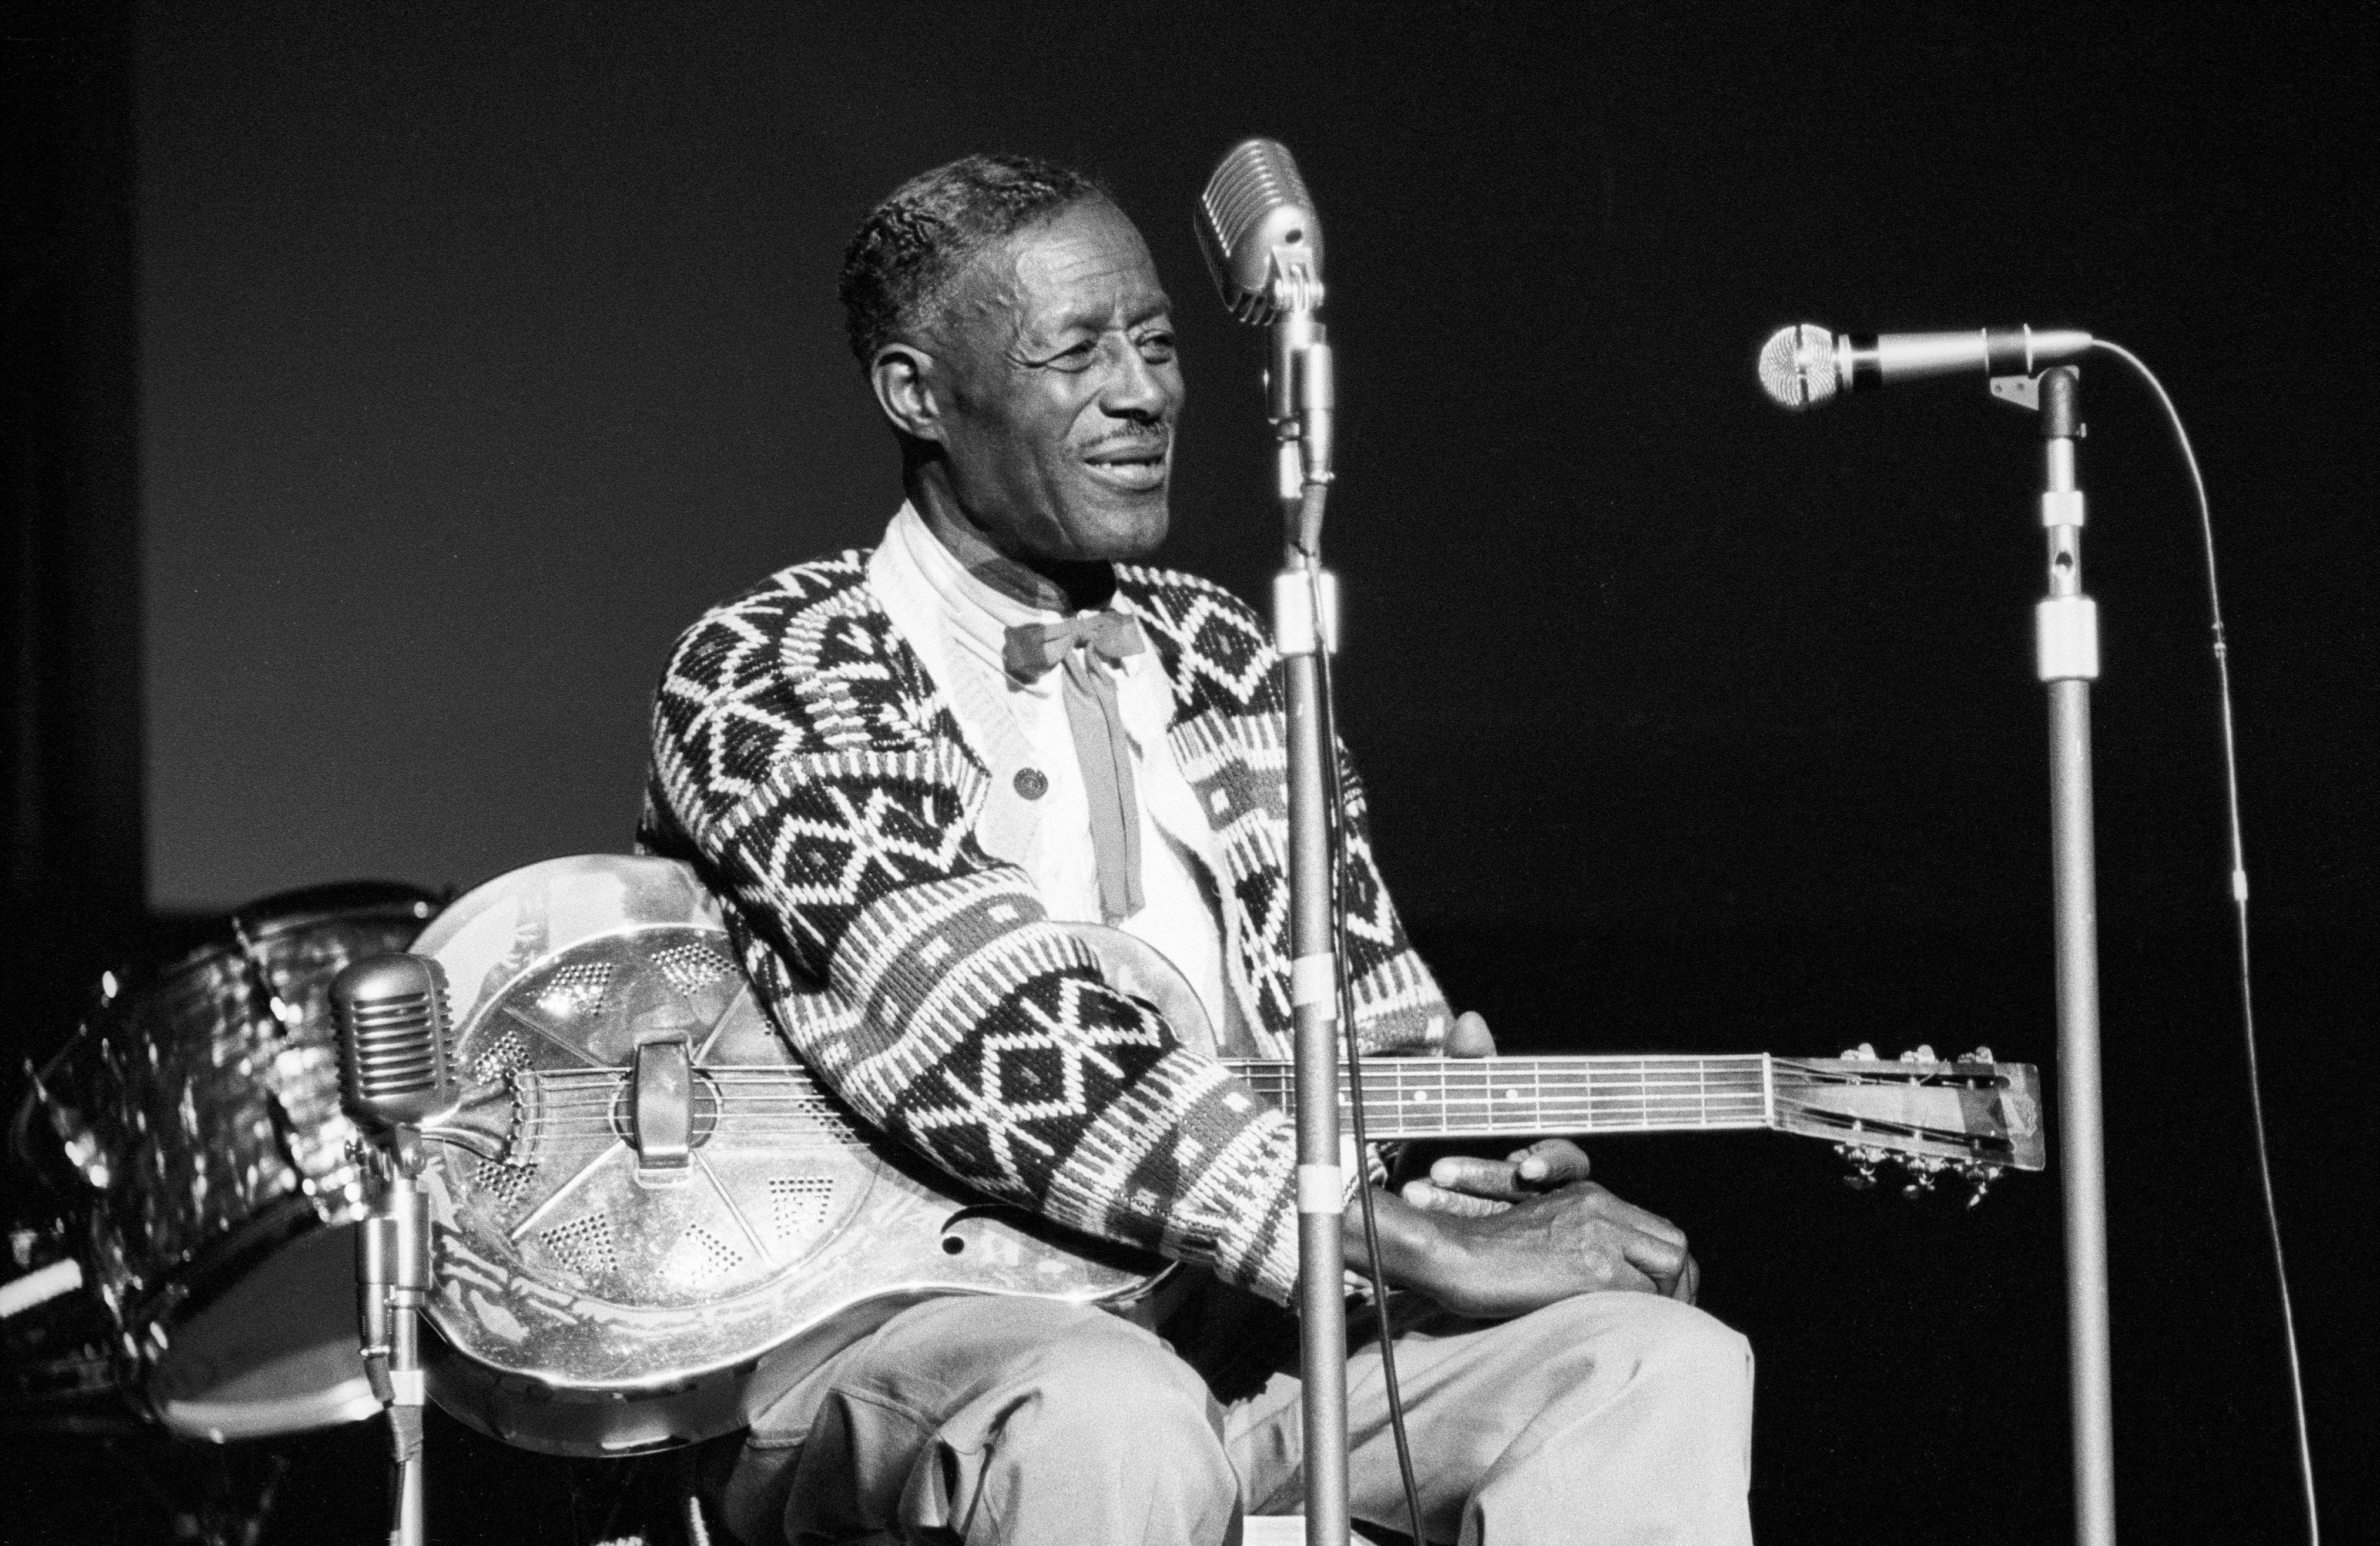 Son House on stage